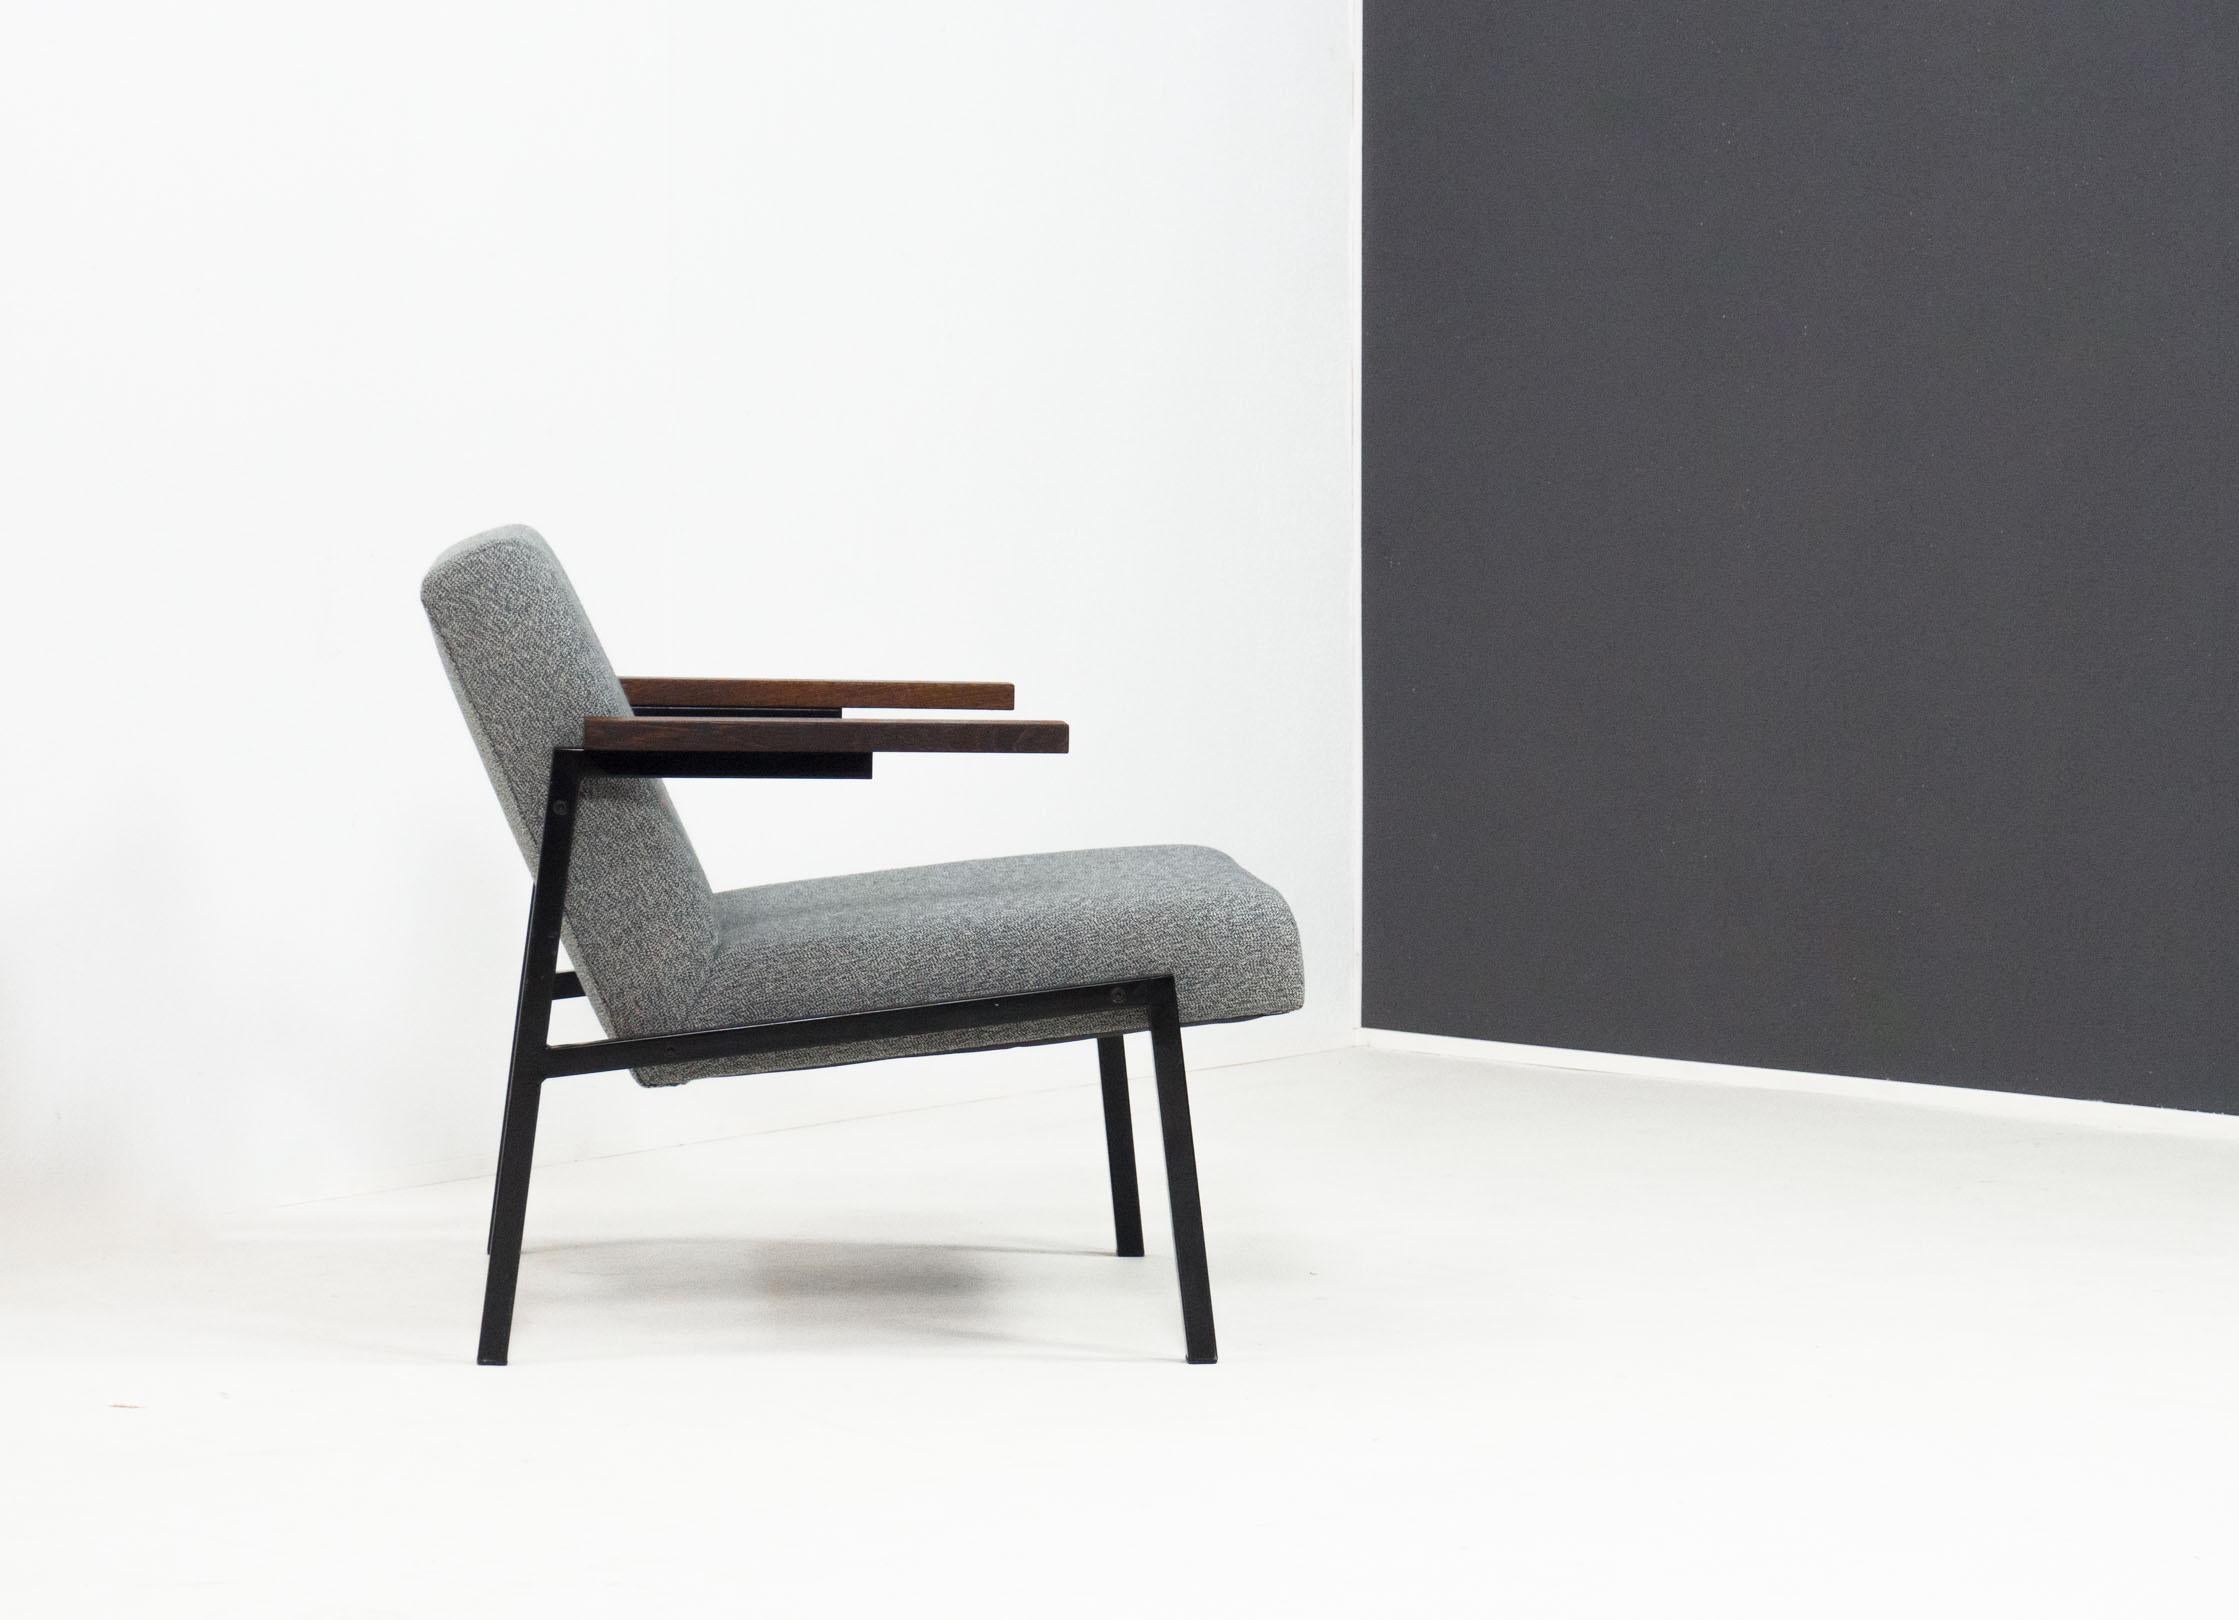 Lounge chair with model name SZ66 designed by Martin Visser for producer Spectrum in 1964, the Netherlands.

This iconic lounge chair is made of a black lacquered metal frame with solid wengé wood arm rests. The seat is newly upholstered in a white